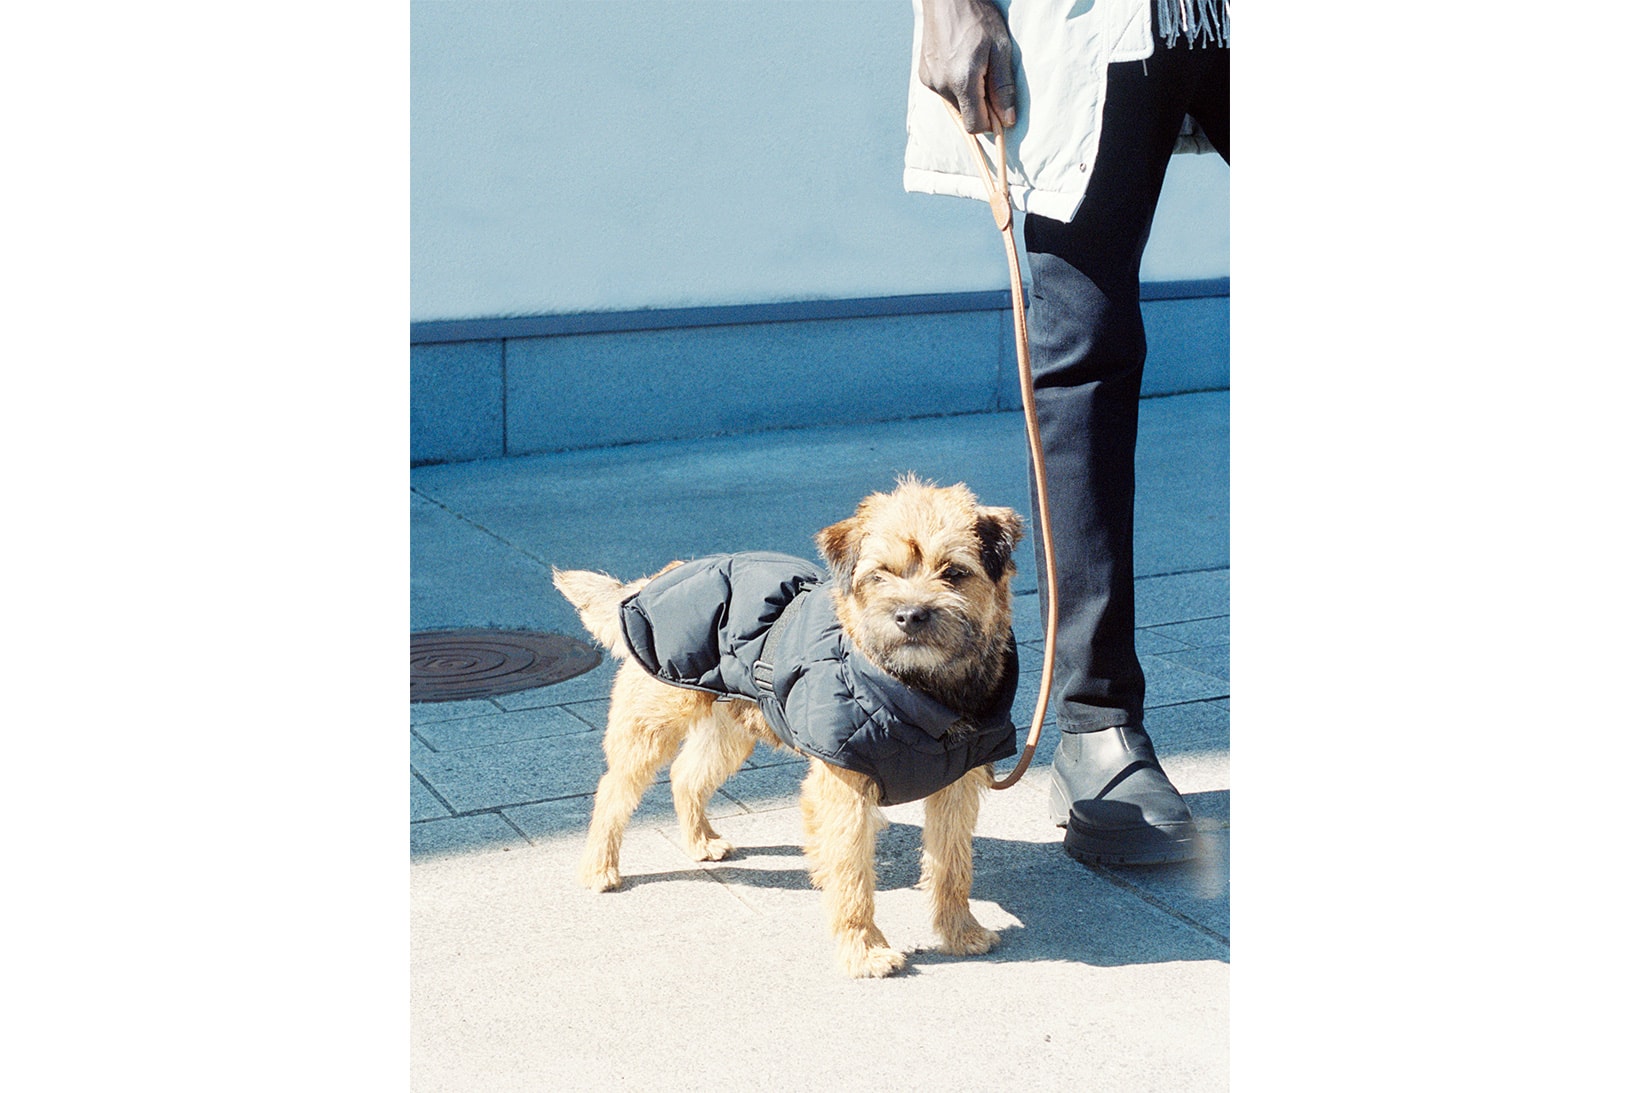 arket upcycled down jackets outerwear dogwear pets fall winter